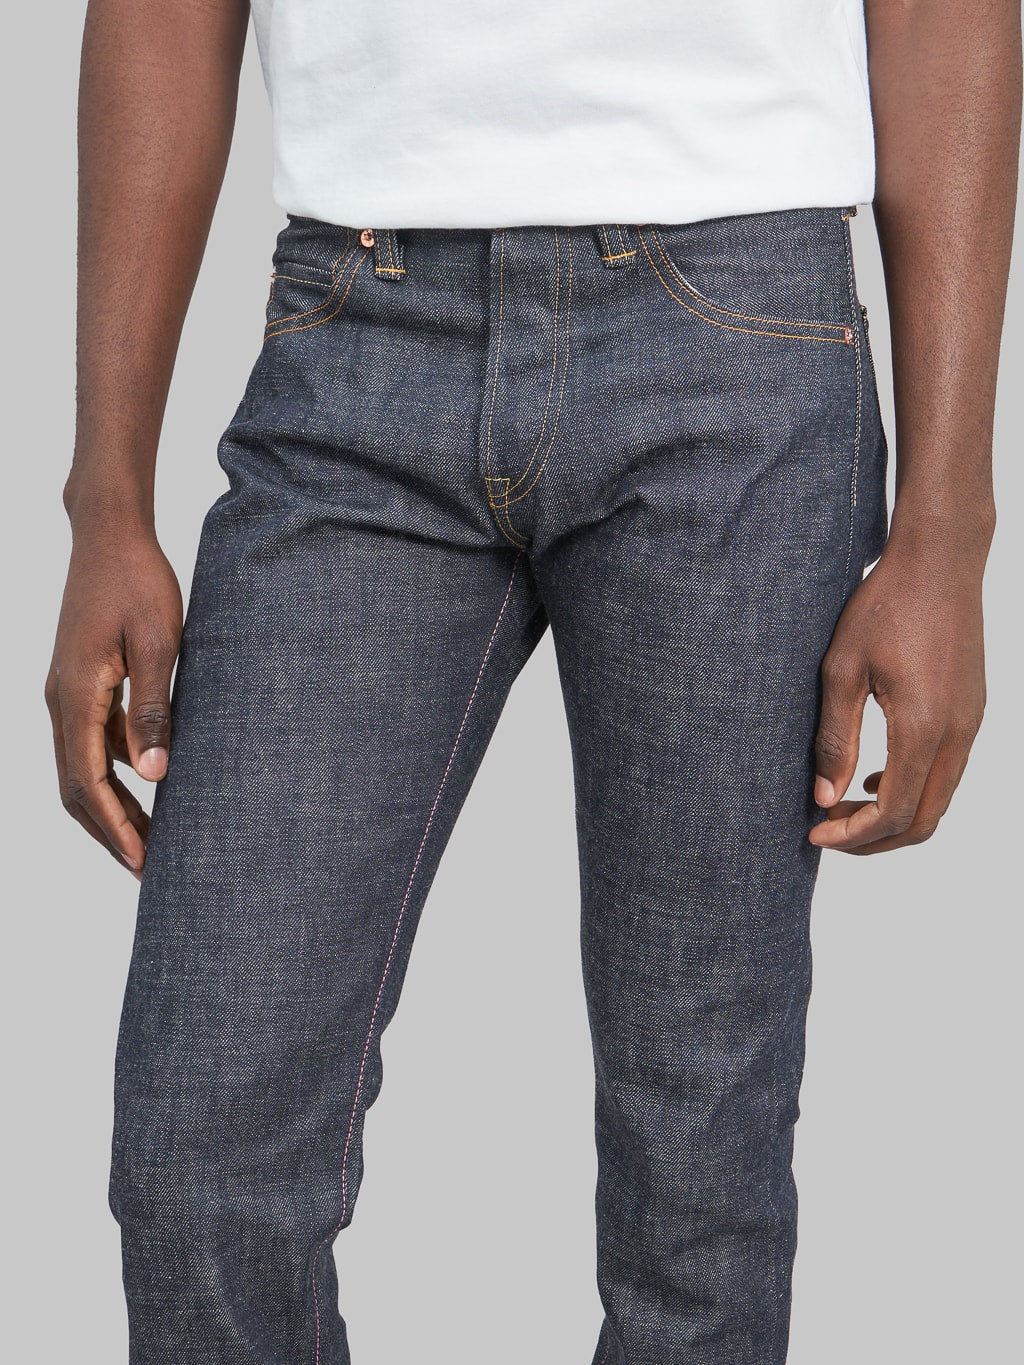 Momotaro 0306 40 Legacy Blue Tight Tapered Jeans waist